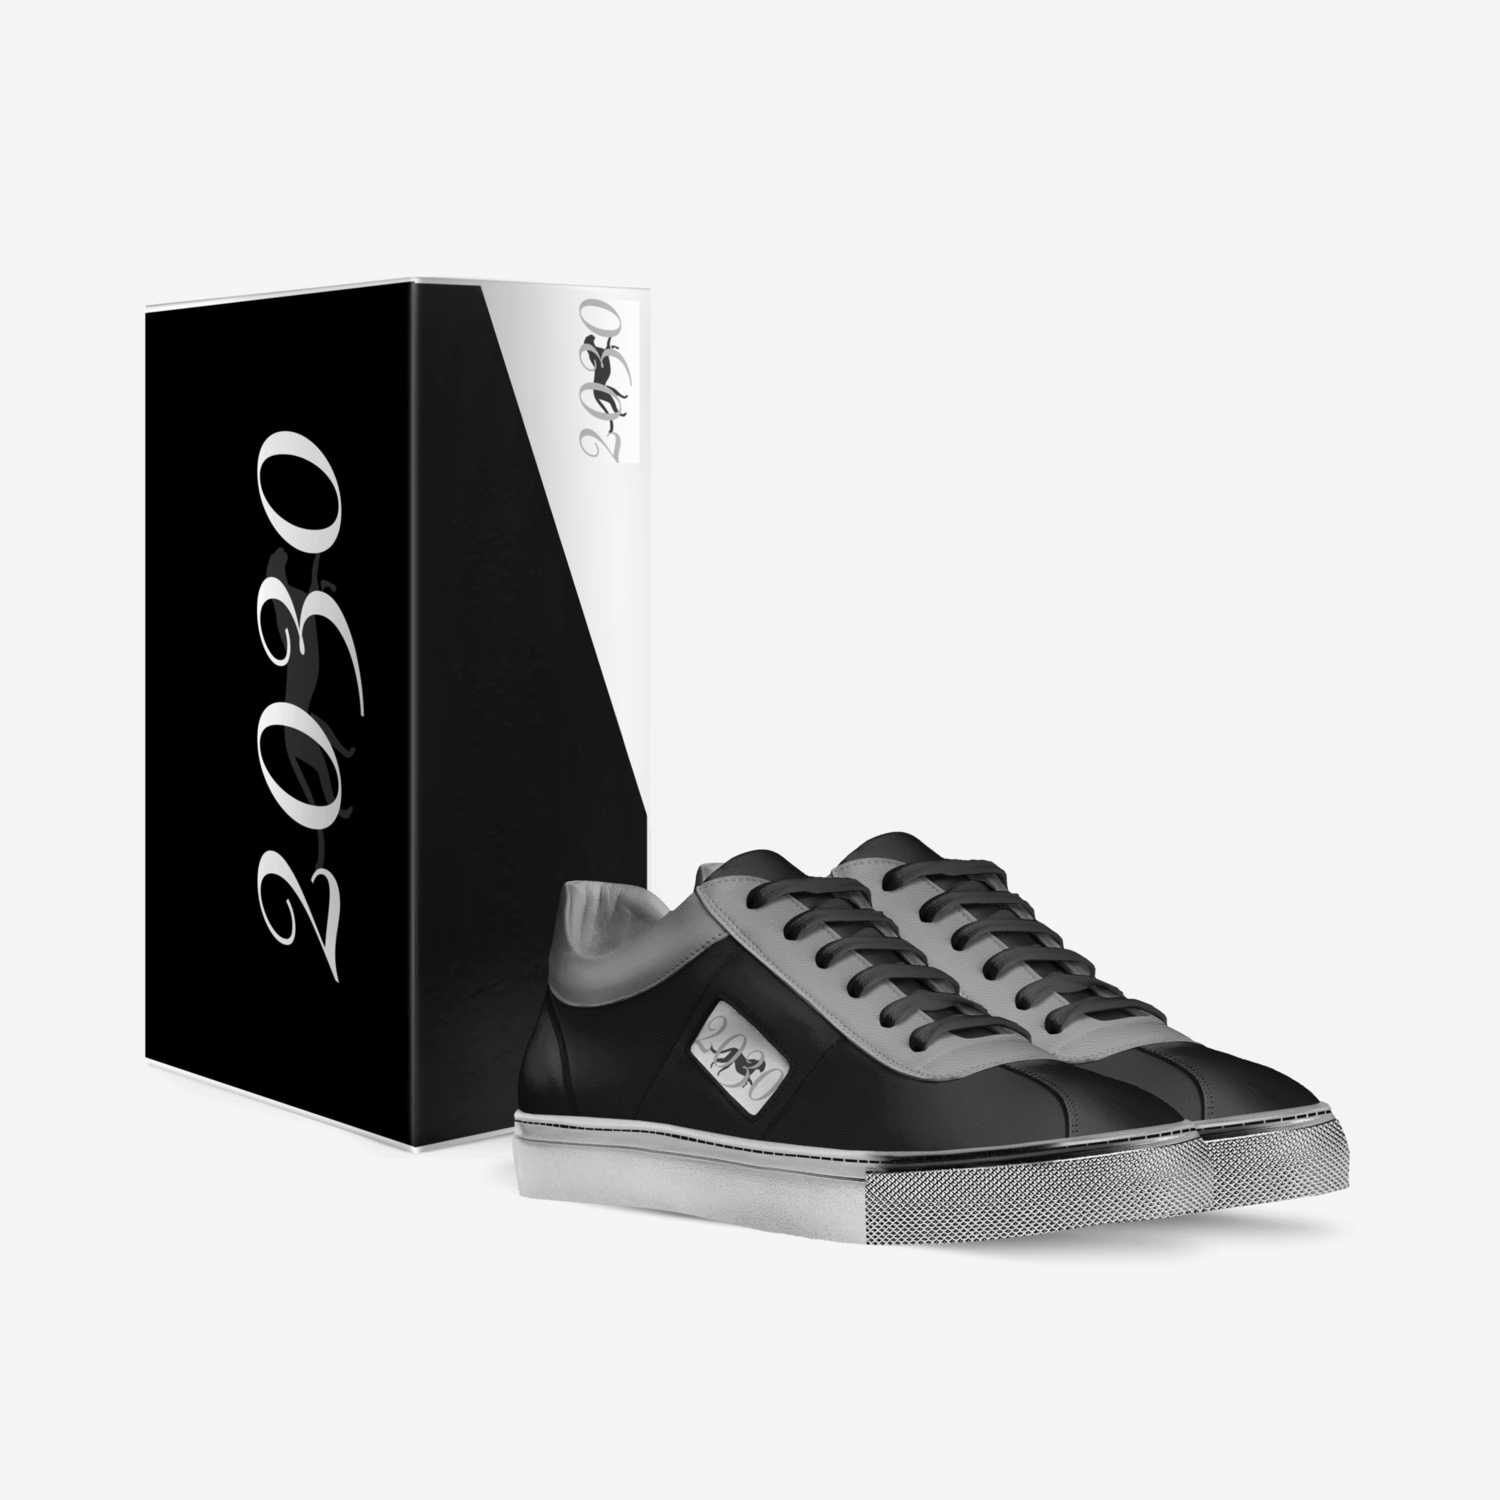 2030 custom made in Italy shoes by JuVon | Box view